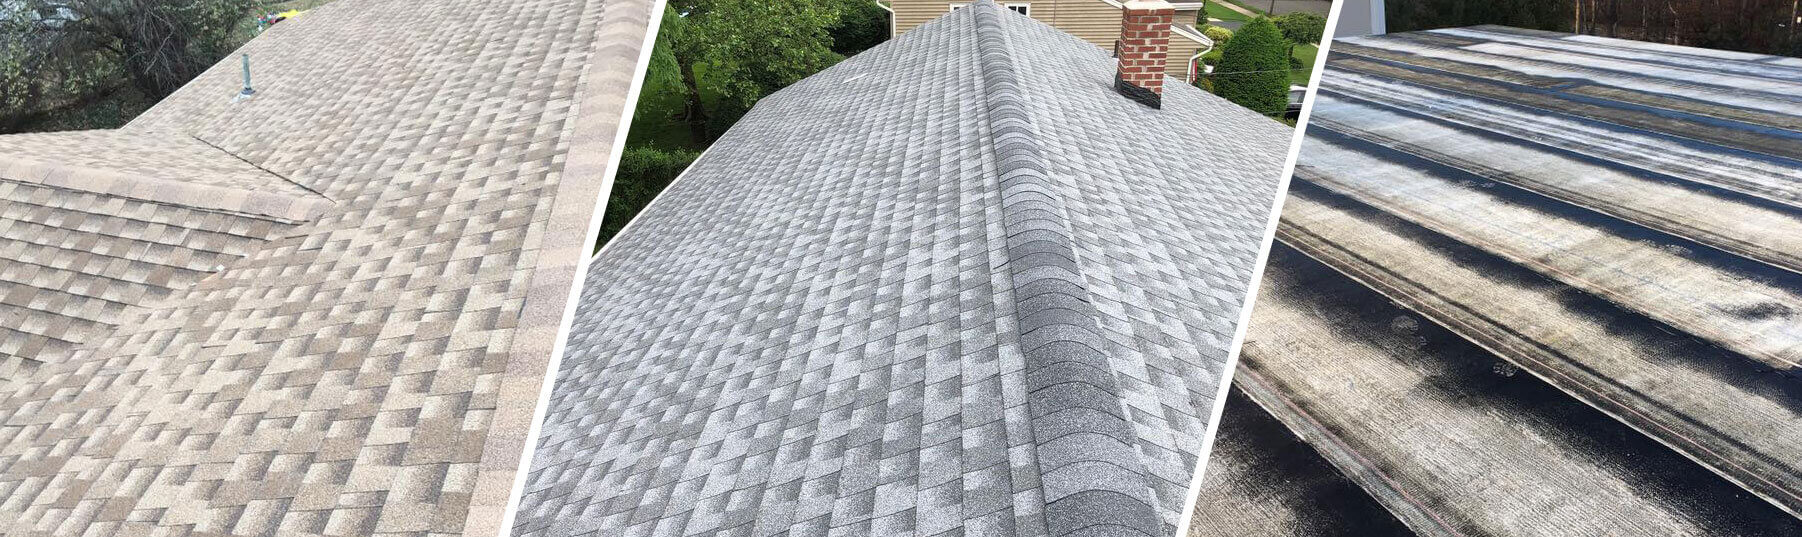 Roof Repair-Tips To Pay Attention To When Repairing The Roof